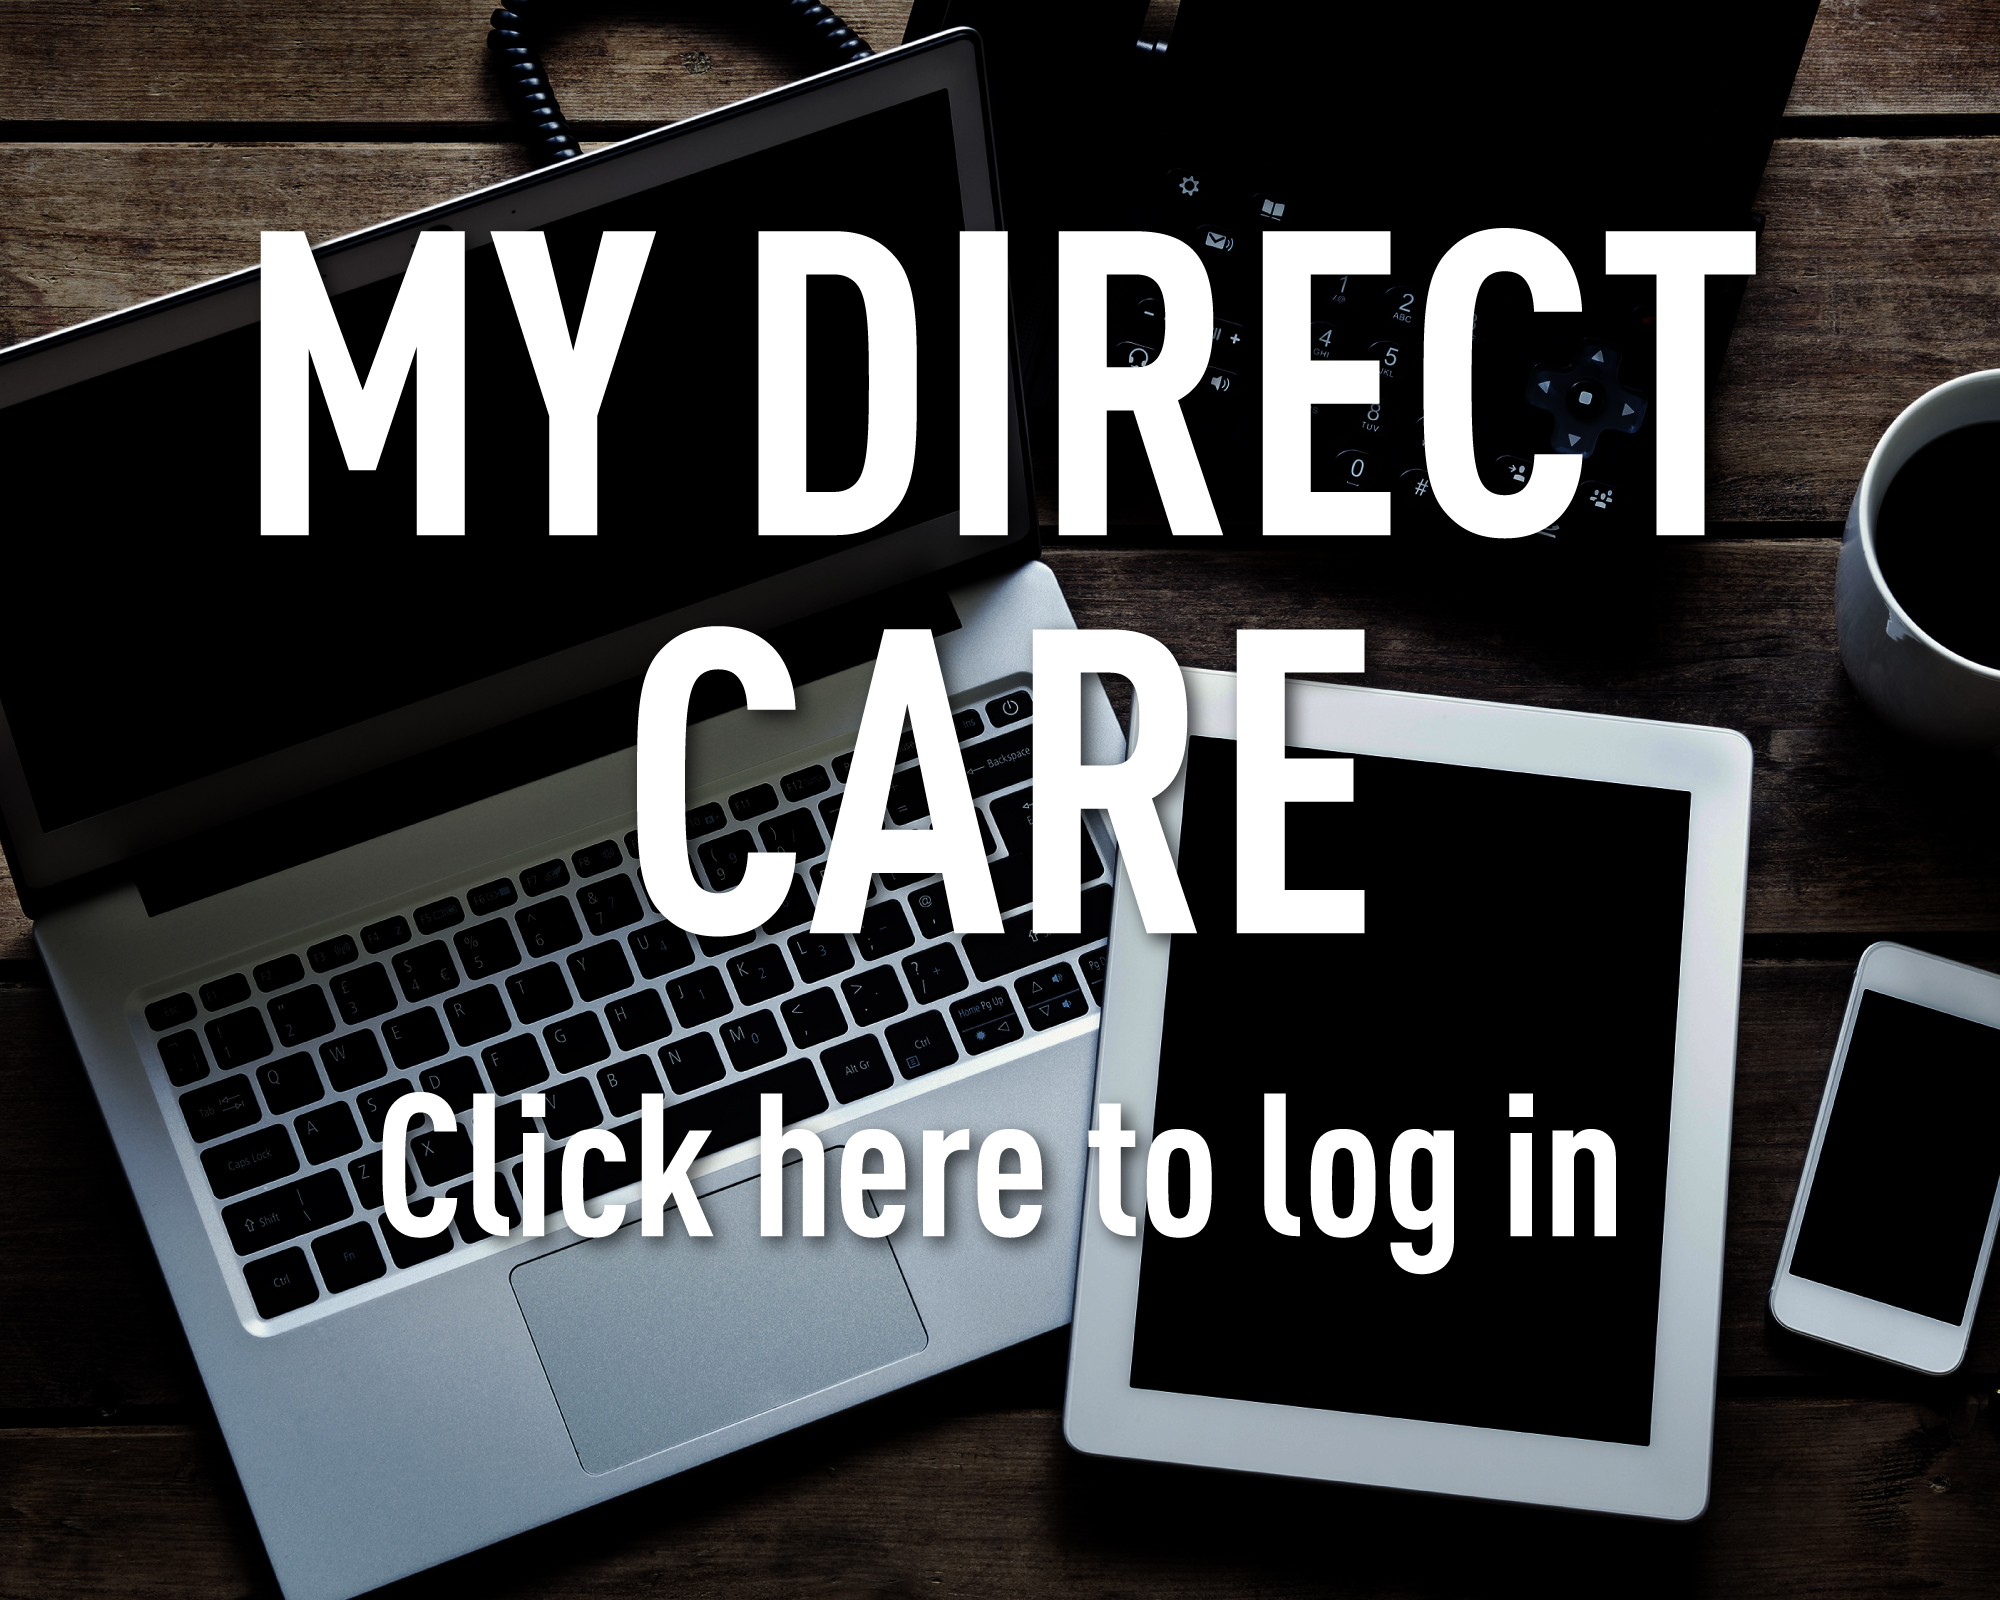 My Direct Care. Click here to log in